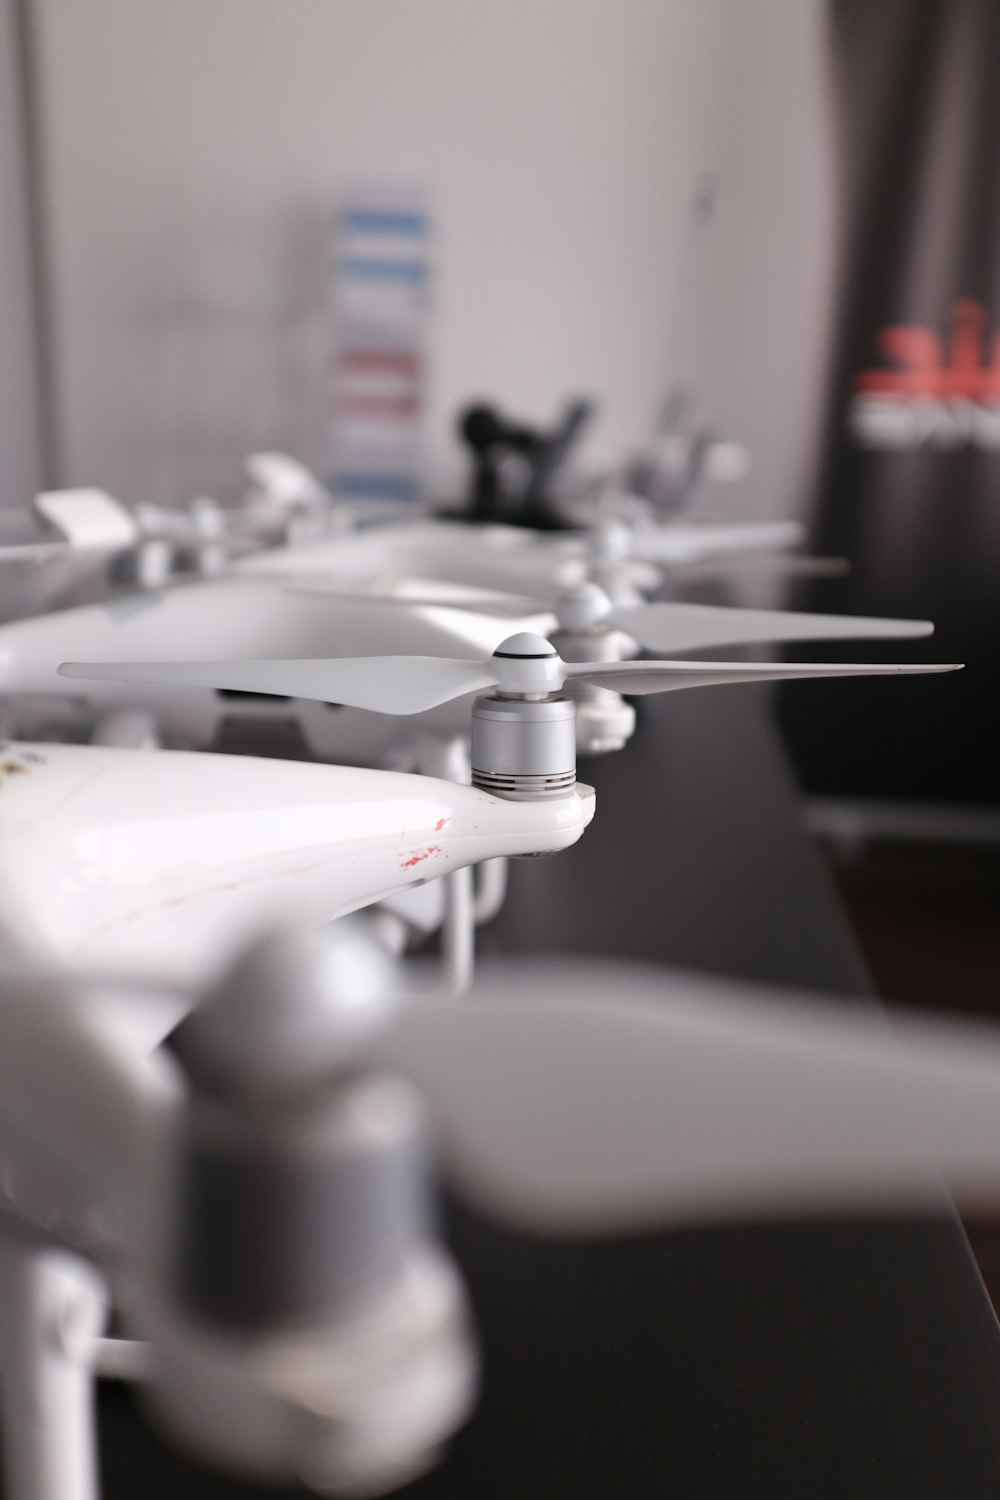 several white drones lining up on table